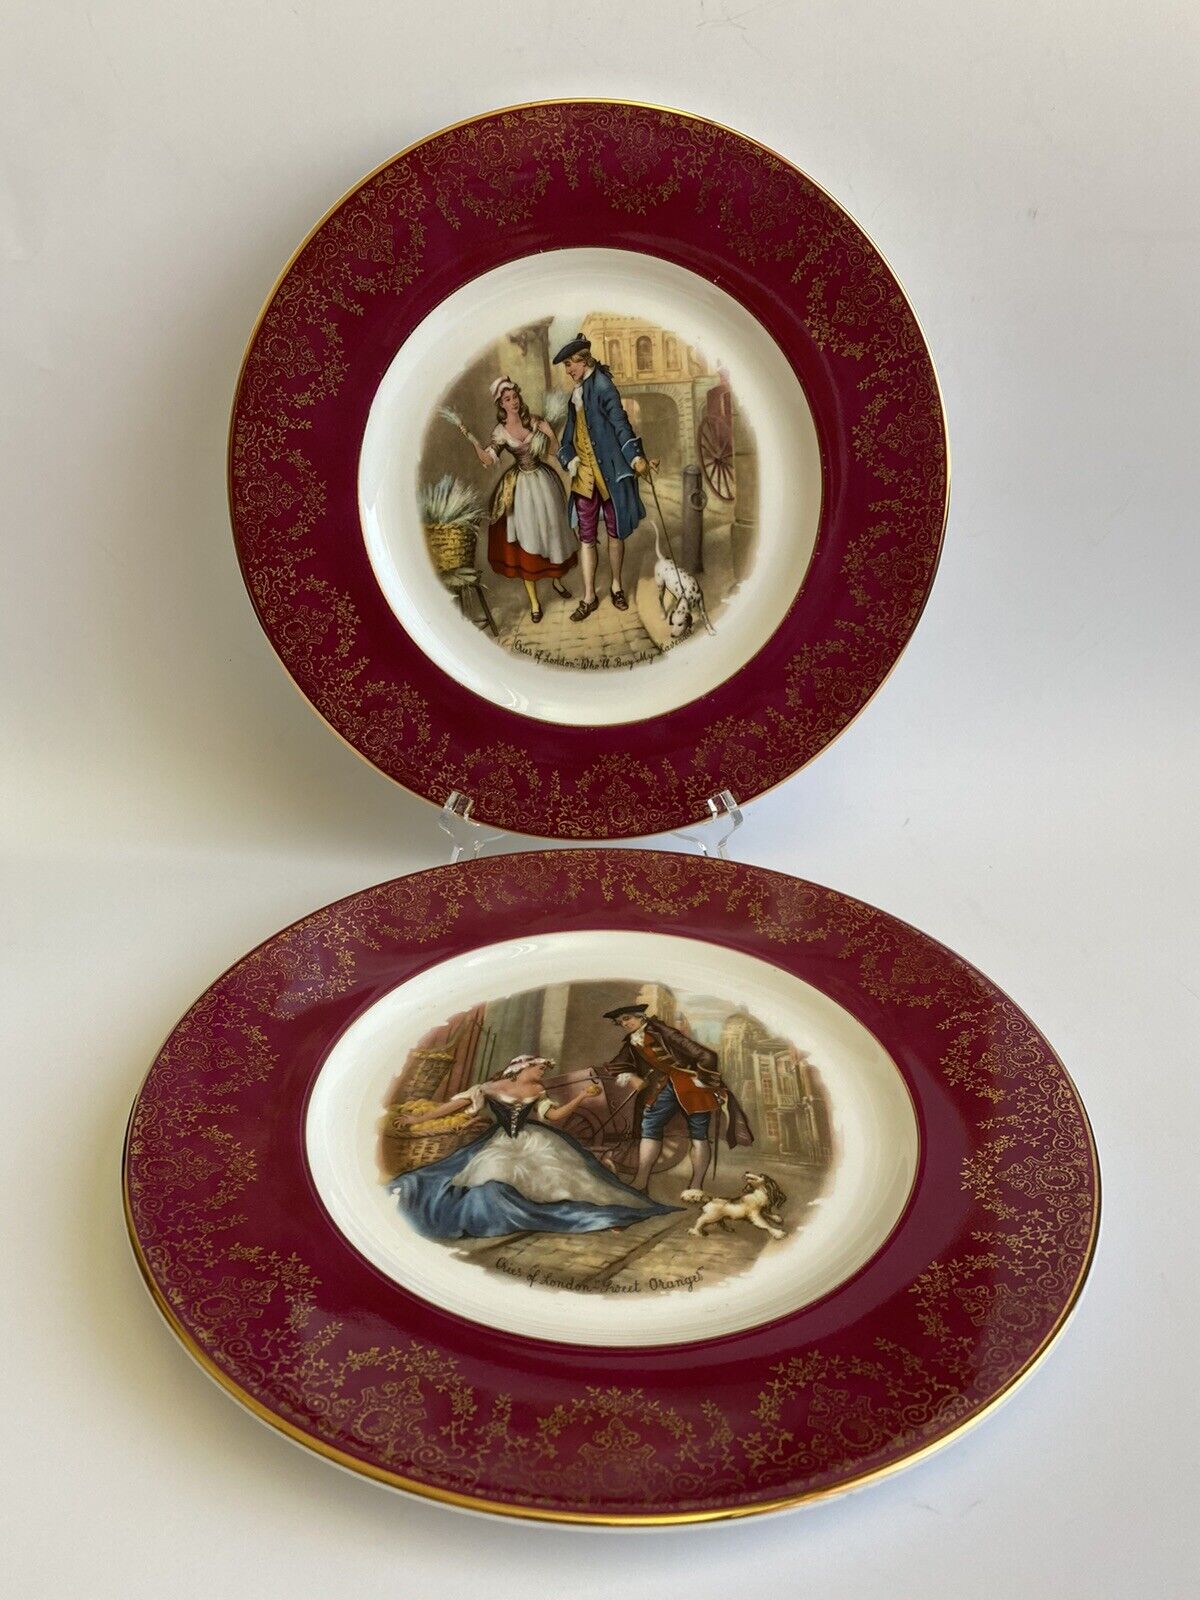 Vintage England Plates Set of 2 Cries of London Ruby Gold 10 5/8”D